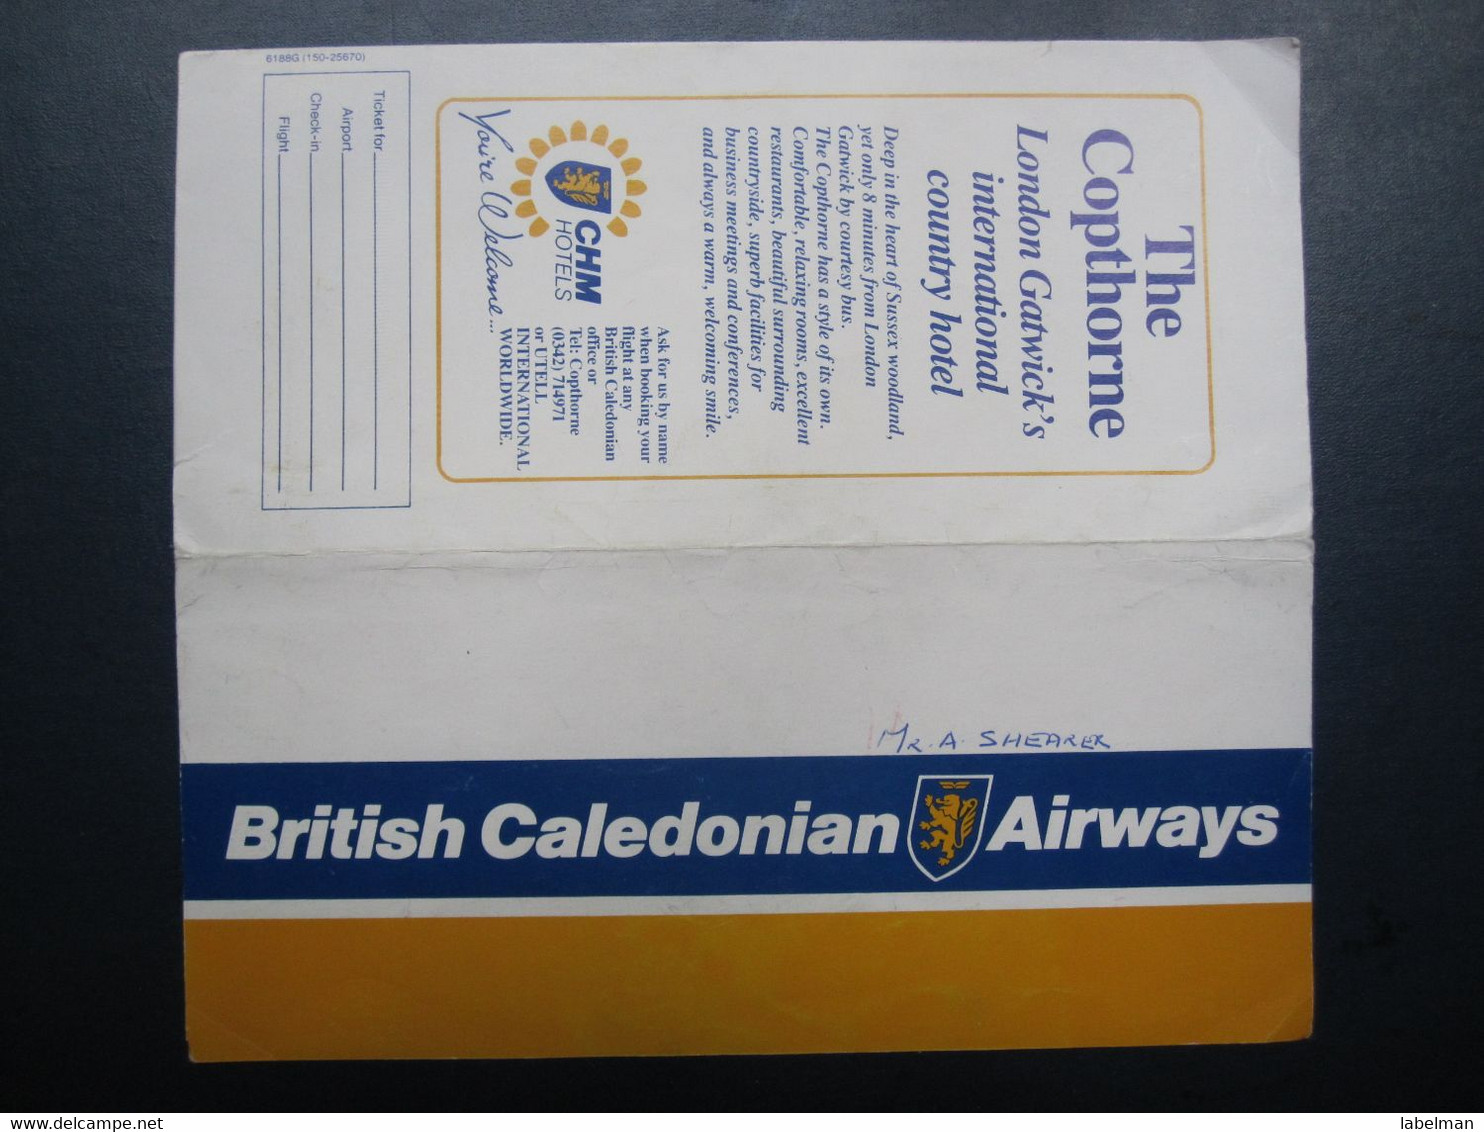 BRITISH CALEDONIAN UK AVIATION AIRWAYS AIRLINE TICKET HOLDER BOOKLET VIP TAG LUGGAGE BAGGAGE PLANE AIRCRAFT AIRPORT - Welt